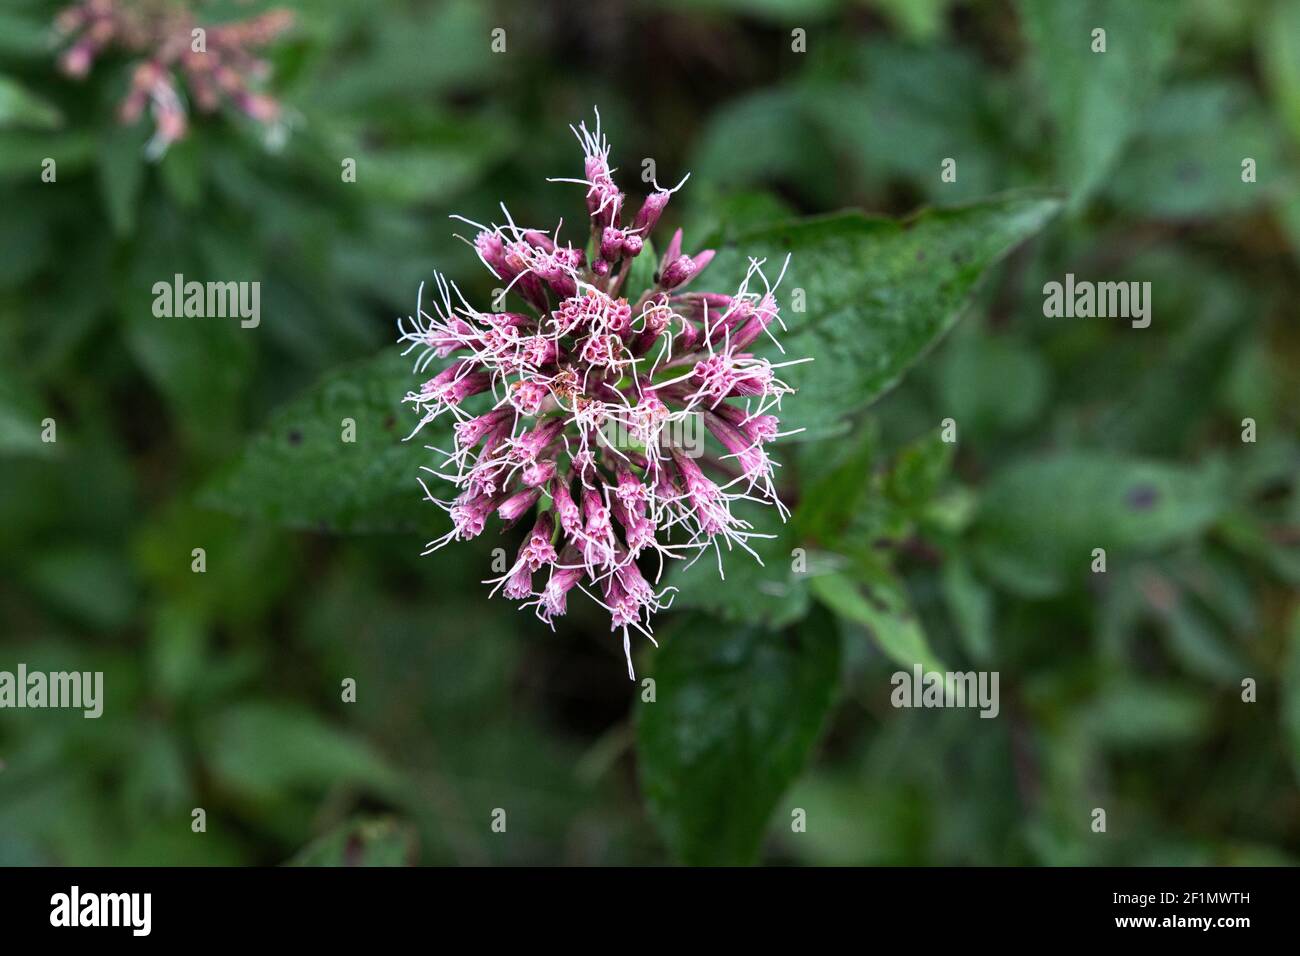 A cluster of Hemp agrimony flowers growing in the wild Stock Photo